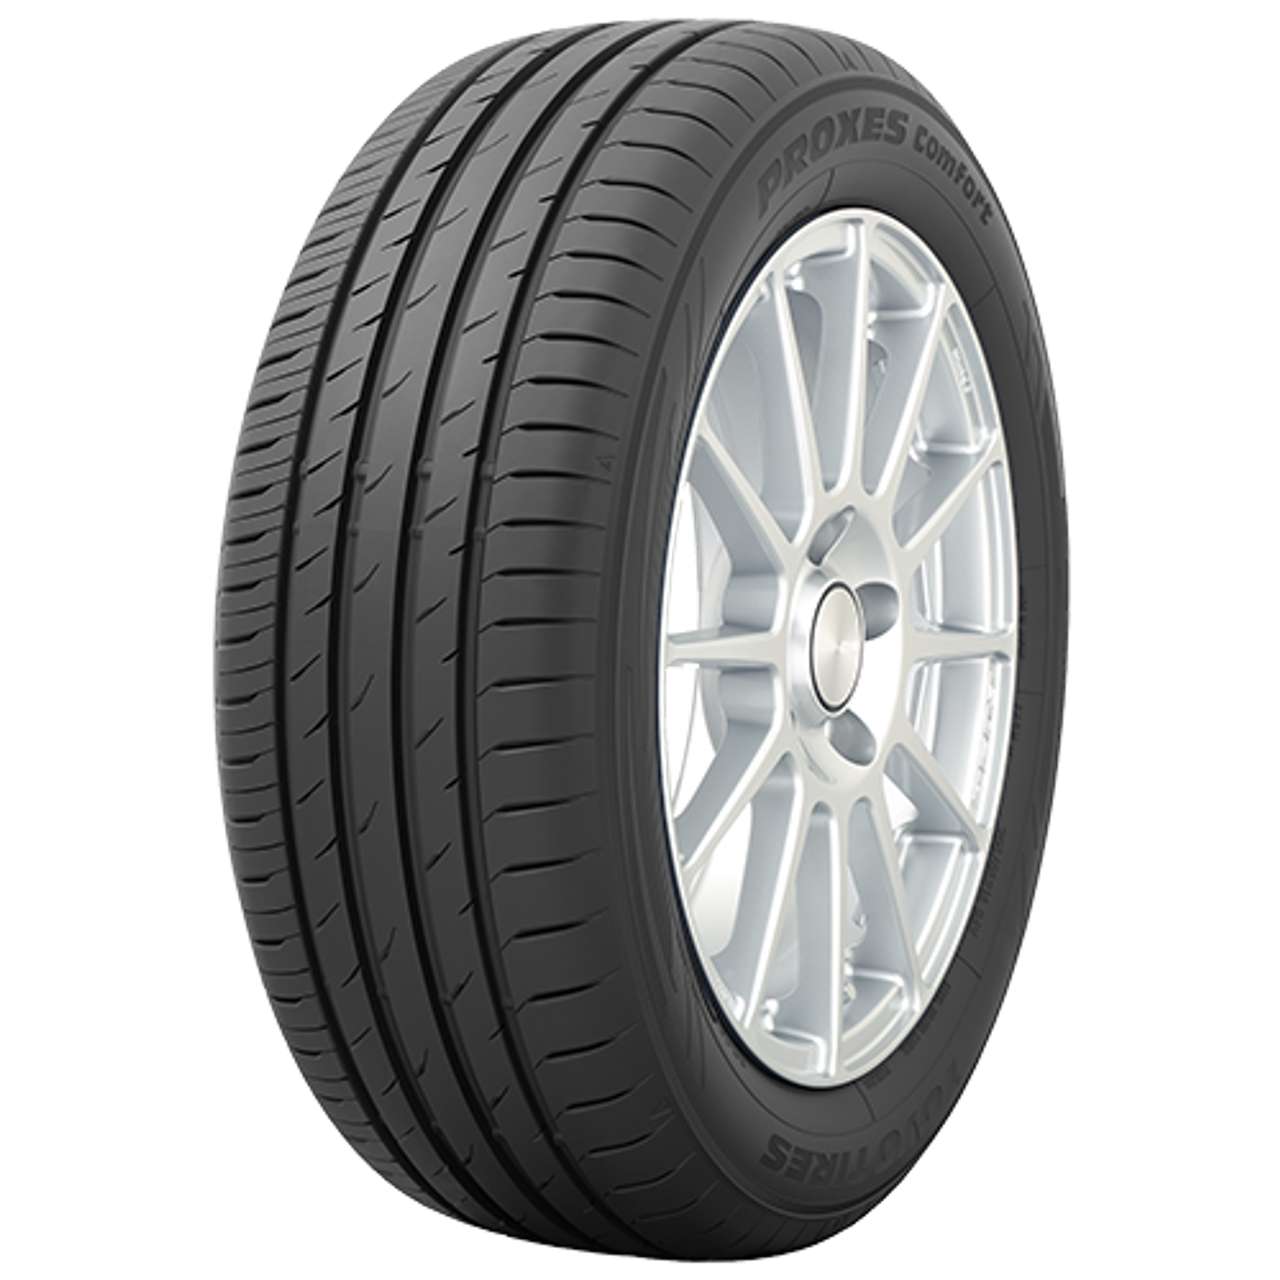 TOYO PROXES COMFORT 205/55R16 91V BSW